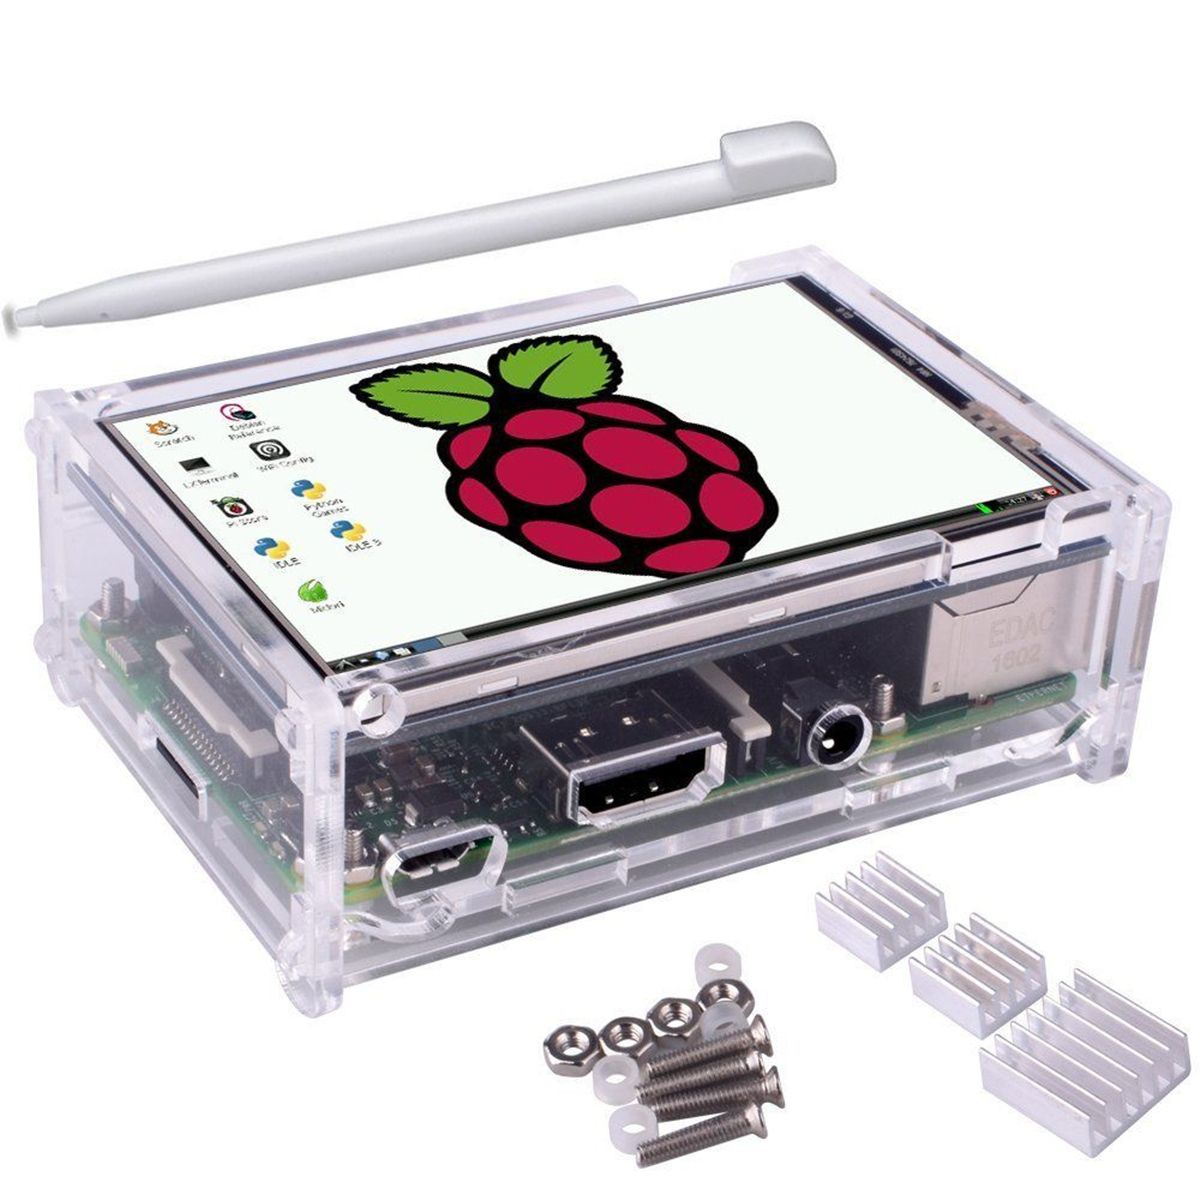 Geekcreitreg-35-inch-TFT-LCD-Touch-Screen--Protective-Case--Heatsink-Touch-Pen-Kit-For-Raspberry-Pi--1269846